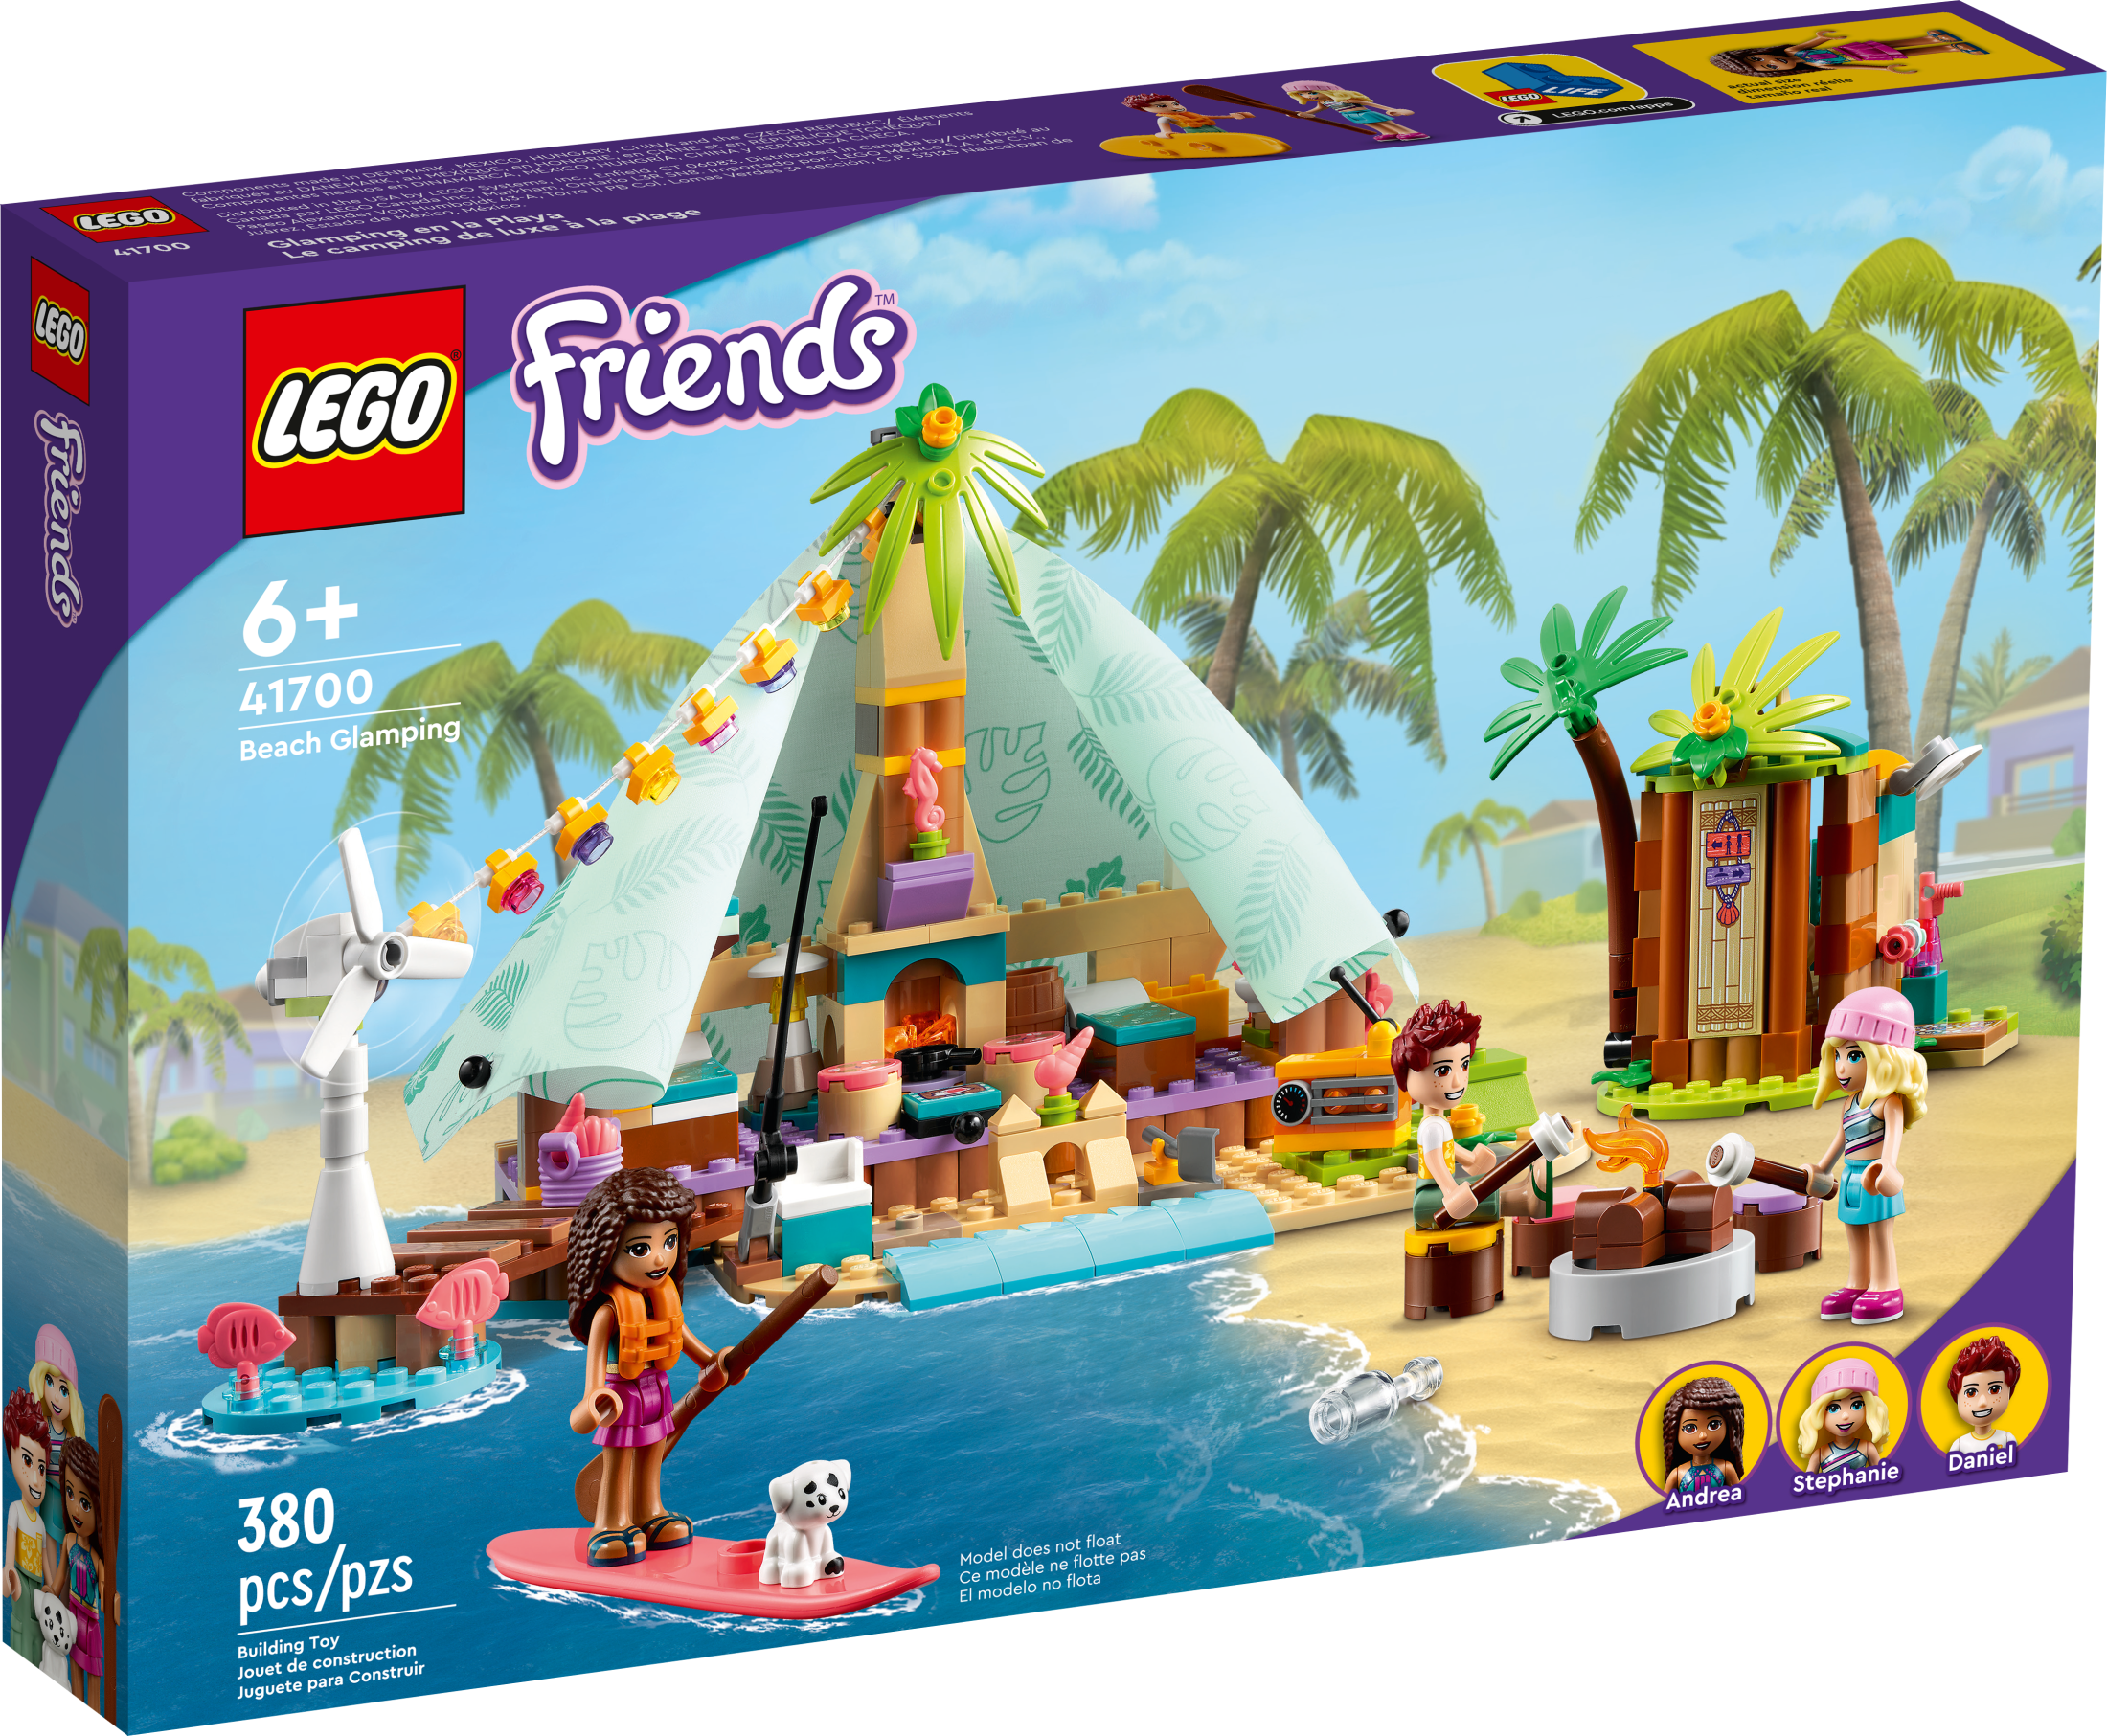 LEGO Friends Beach Glamping 41700 Building Kit; Creative Gift for Kids Aged 6 and up Who Love Nature Toys and Popular Glamping Trips (380 Pieces) - image 3 of 8